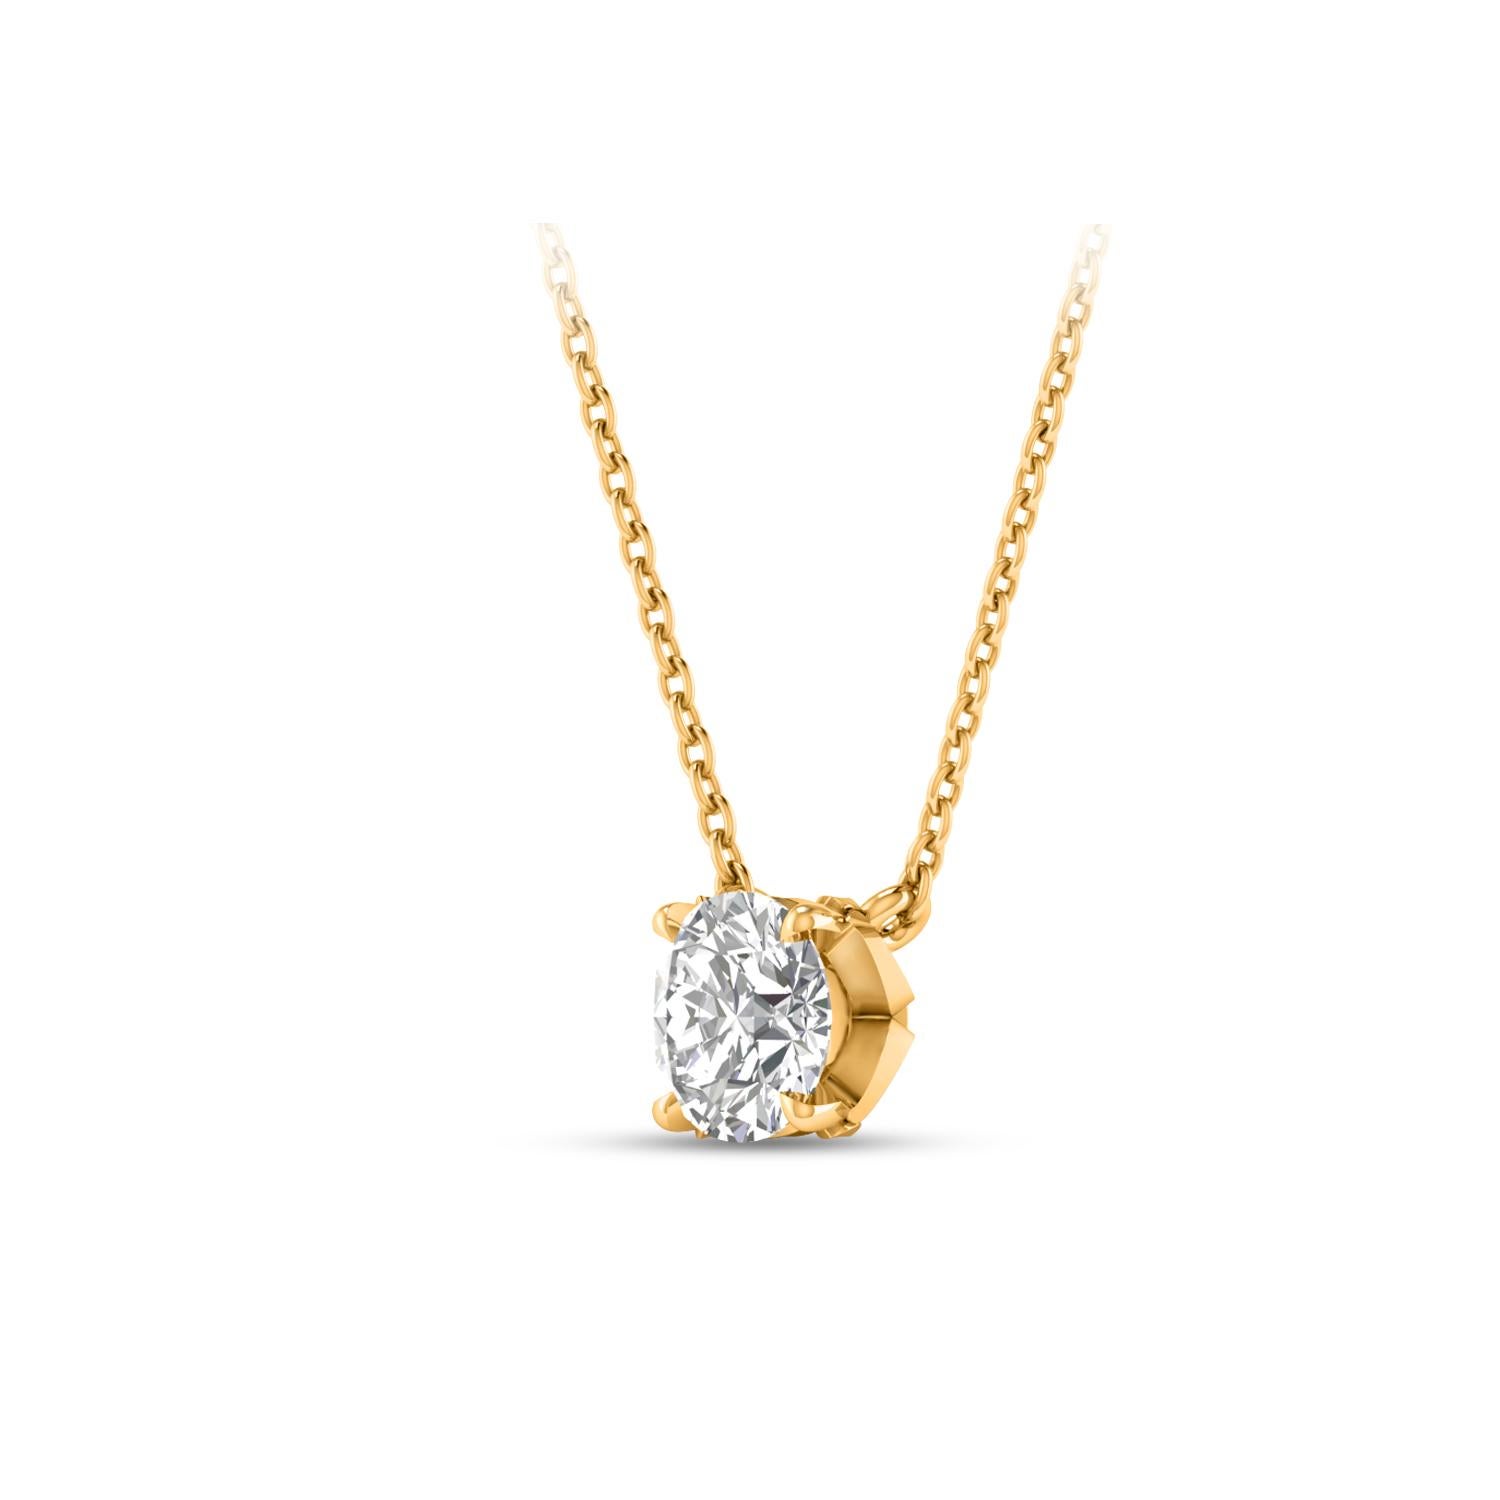 This solitaire diamond necklace features a single, brilliant-cut 0.33 carat diamond in prong setting crafted in 18 KT yellow gold. This elegant necklace includes 20-inch cable chain with extender at 18-inch.  

(Carat weights may vary slightly due